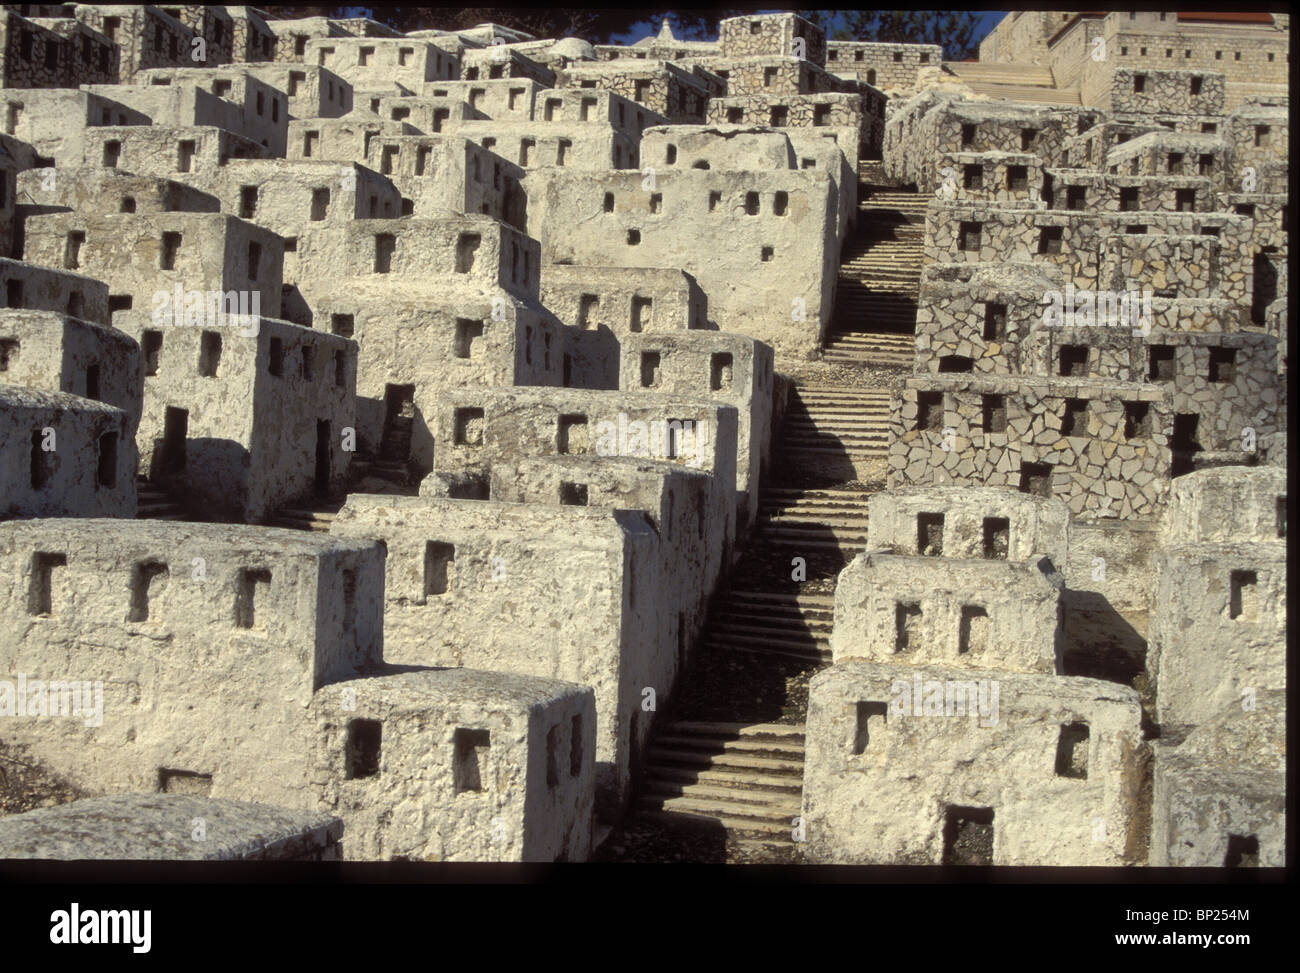 797. RESIDENTIAL NEIGHBORHOOD OF HERODIAN JERUSALEM, LOCATED ON THE EASTERN HILL, FACING THE TEMPLE MOUNT. Holy Land model Stock Photo